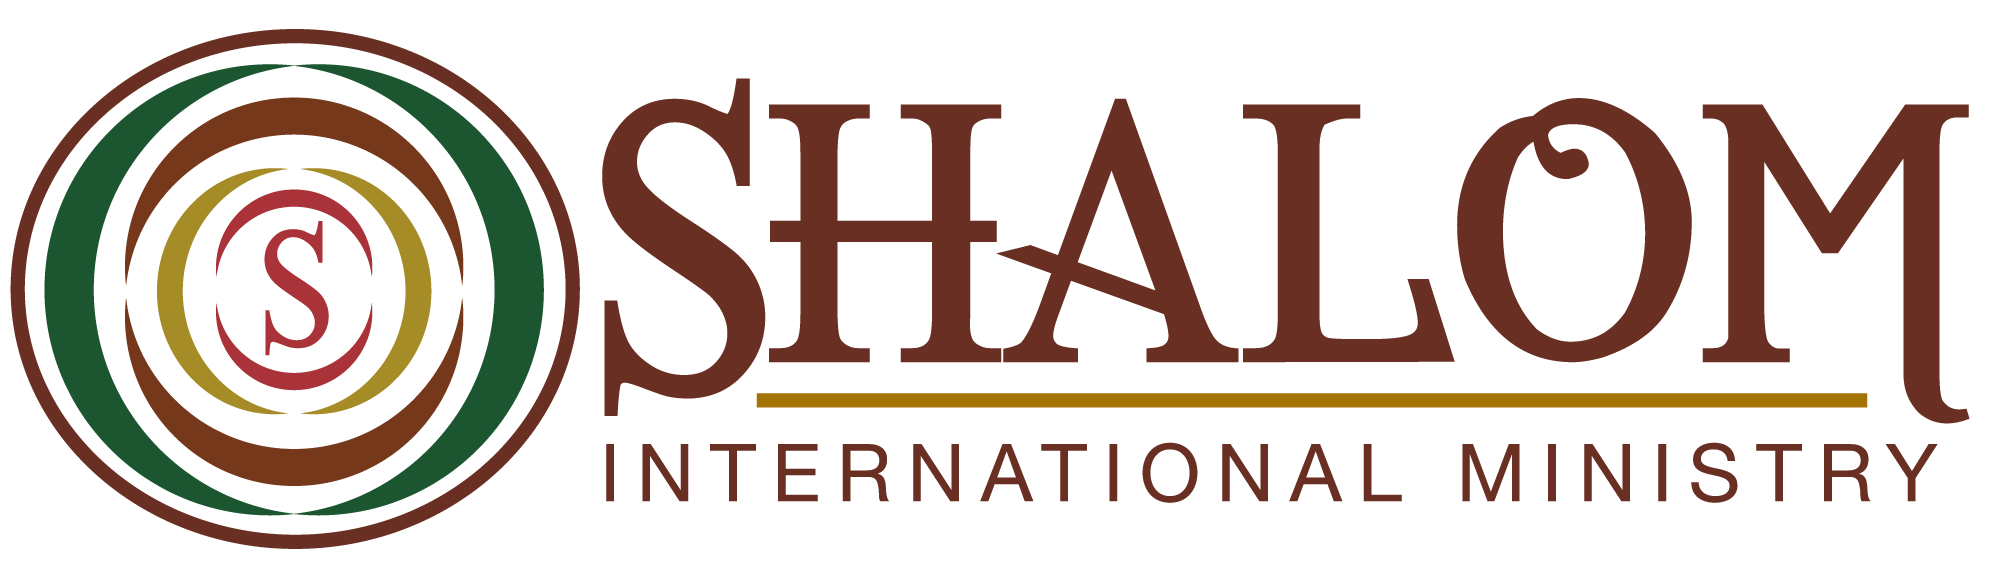 Shalom International Ministry, is a cross-cultural ministrythat seeks to witness to the promise of God's holistic peace (shalom) embodied in Jesus Christ.